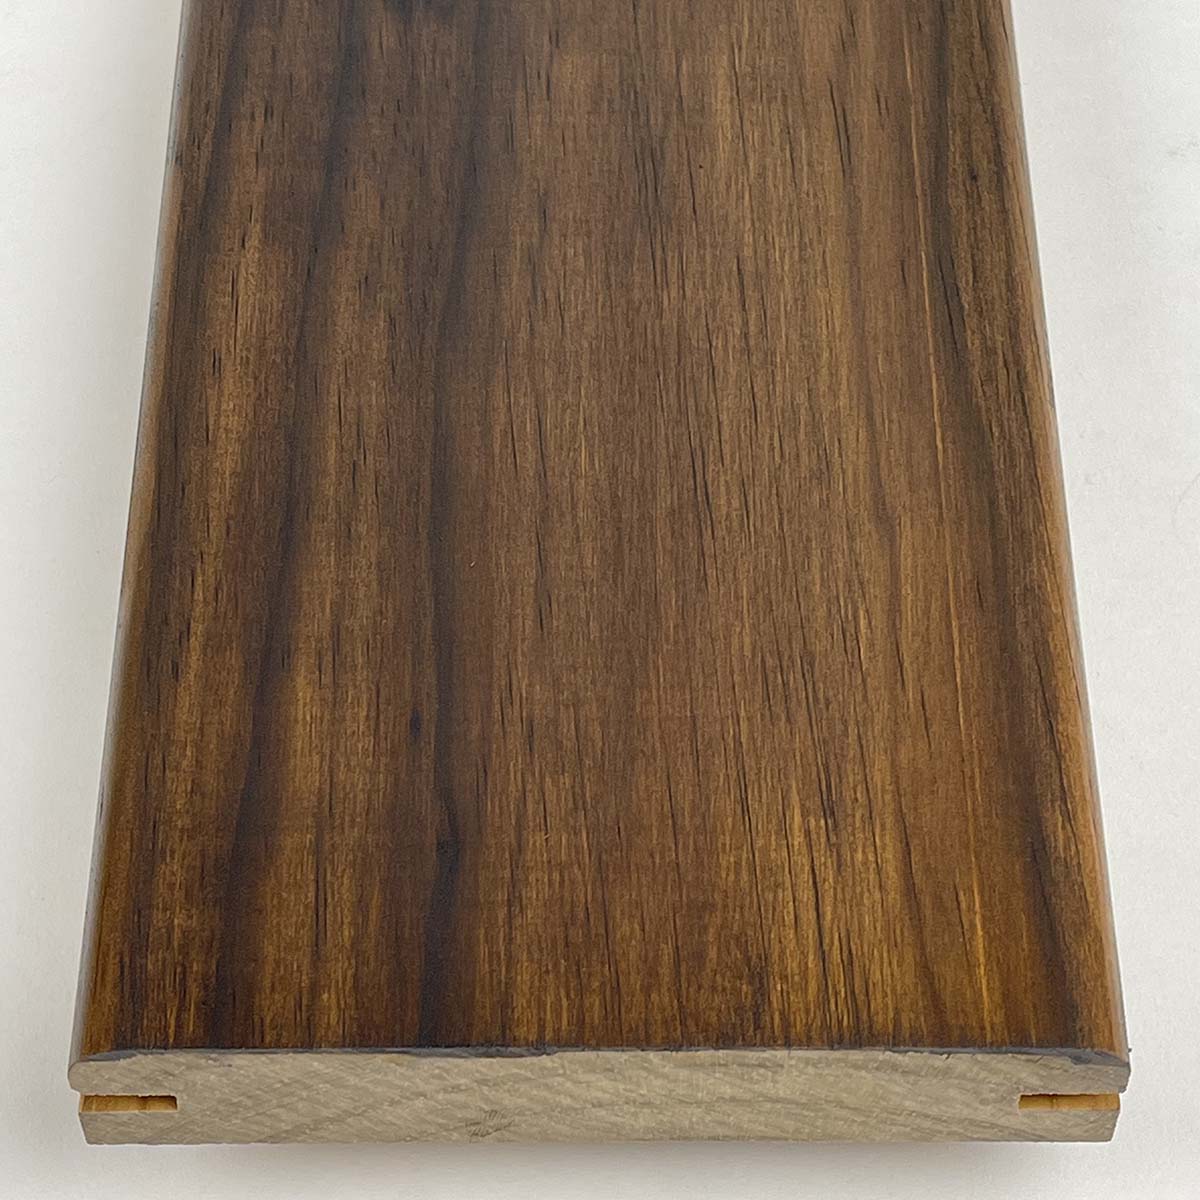 >Rhino Wood South African Pine Thermally Modified  